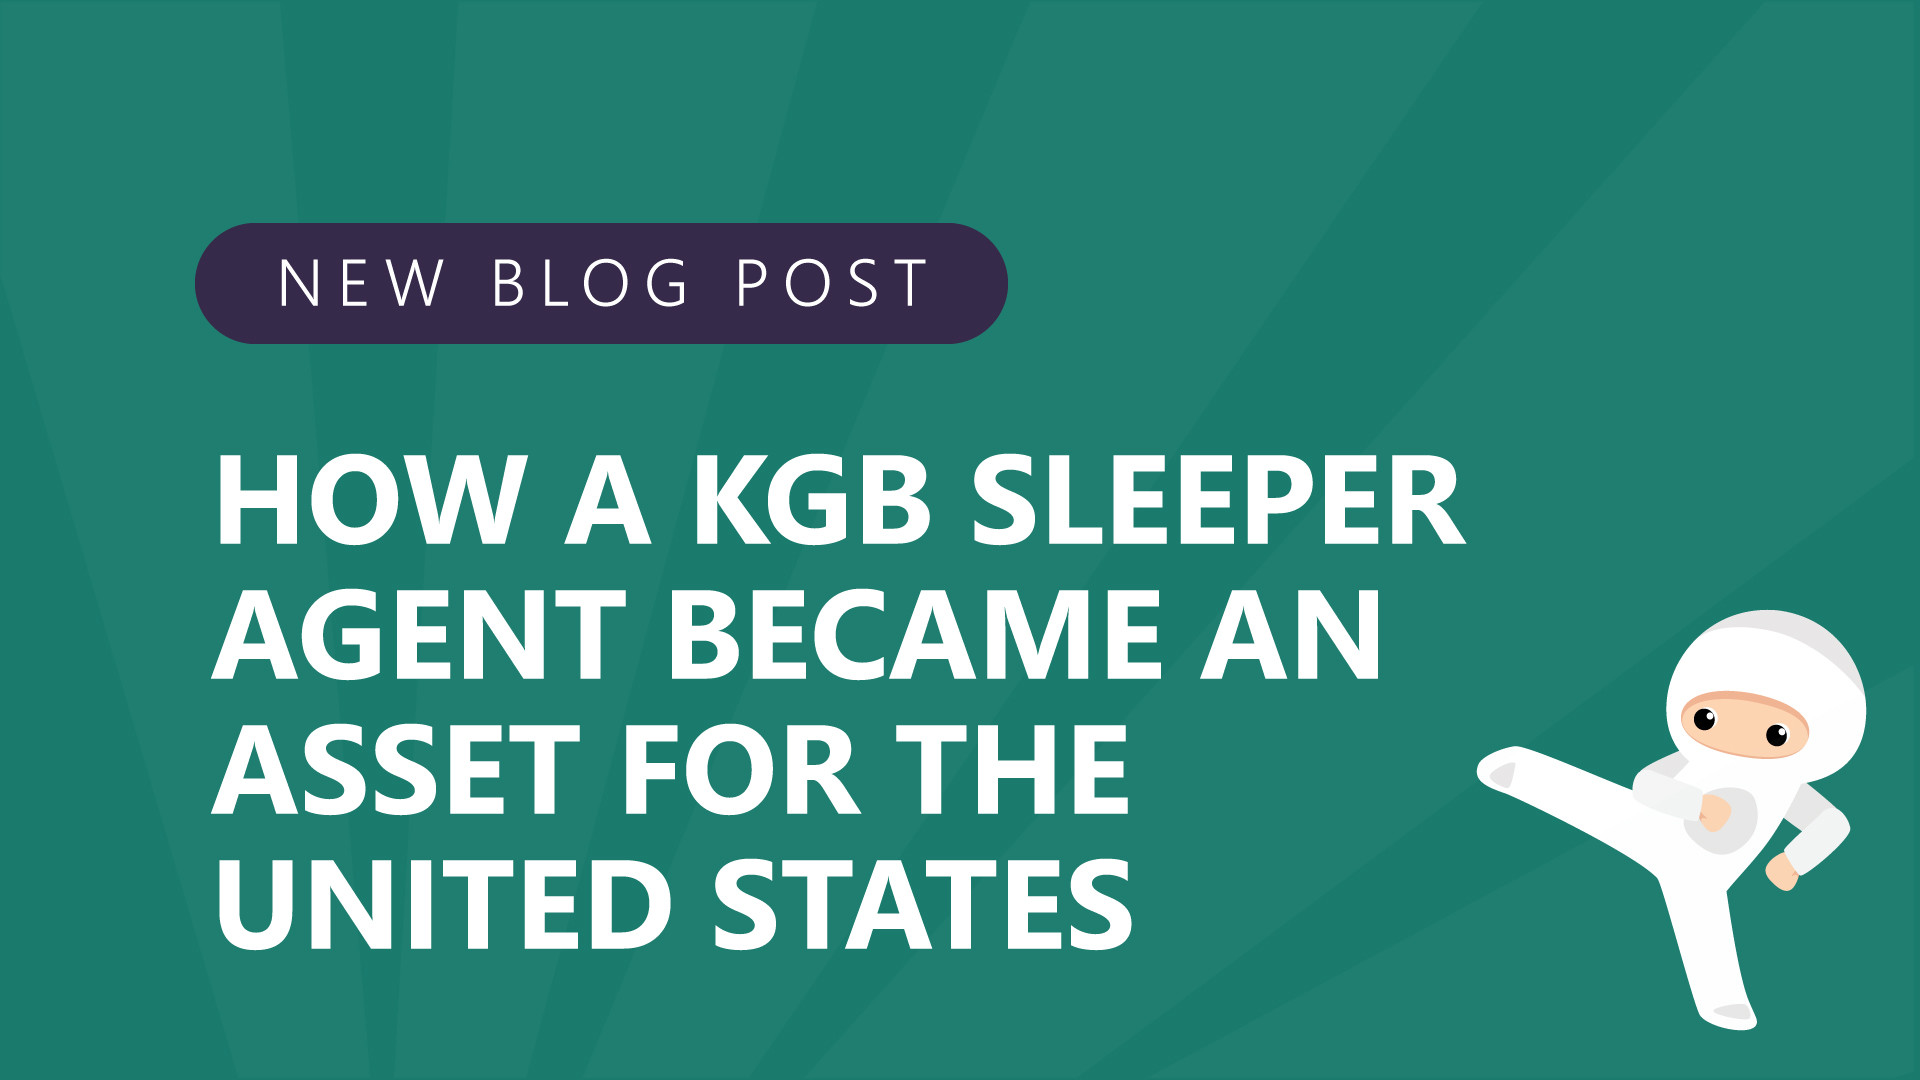 How a kgb sleeper agent became an asset for the united states 1 1